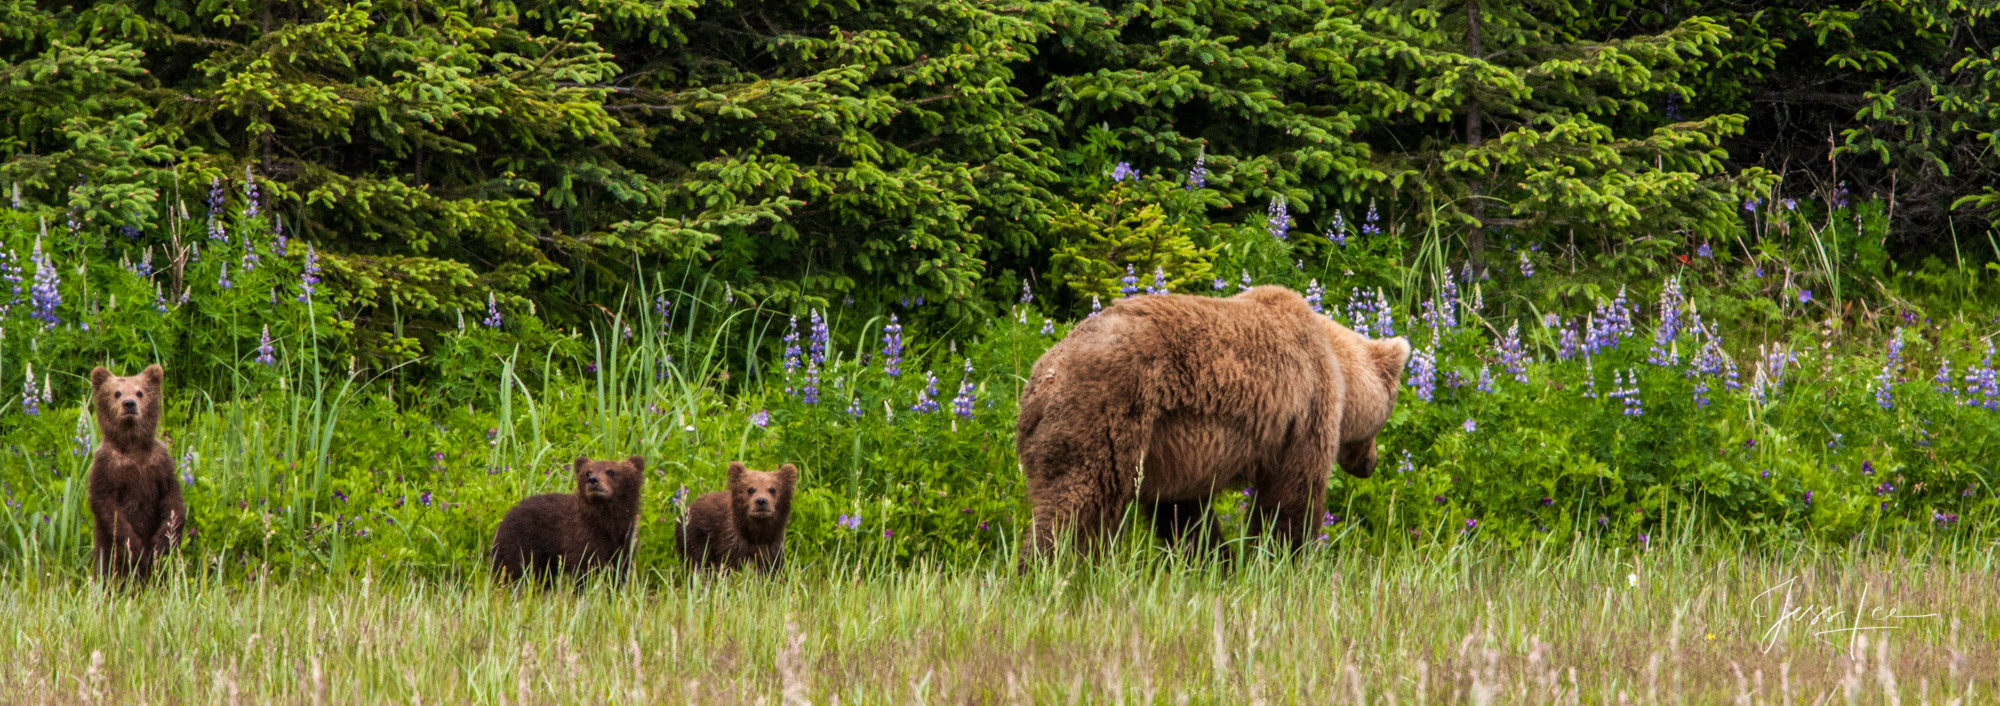 Alaska Grizzly with three cubs in lupin flowers a Limited edition of 800 prints. These Grizzly bear fine art wildlife photographs...